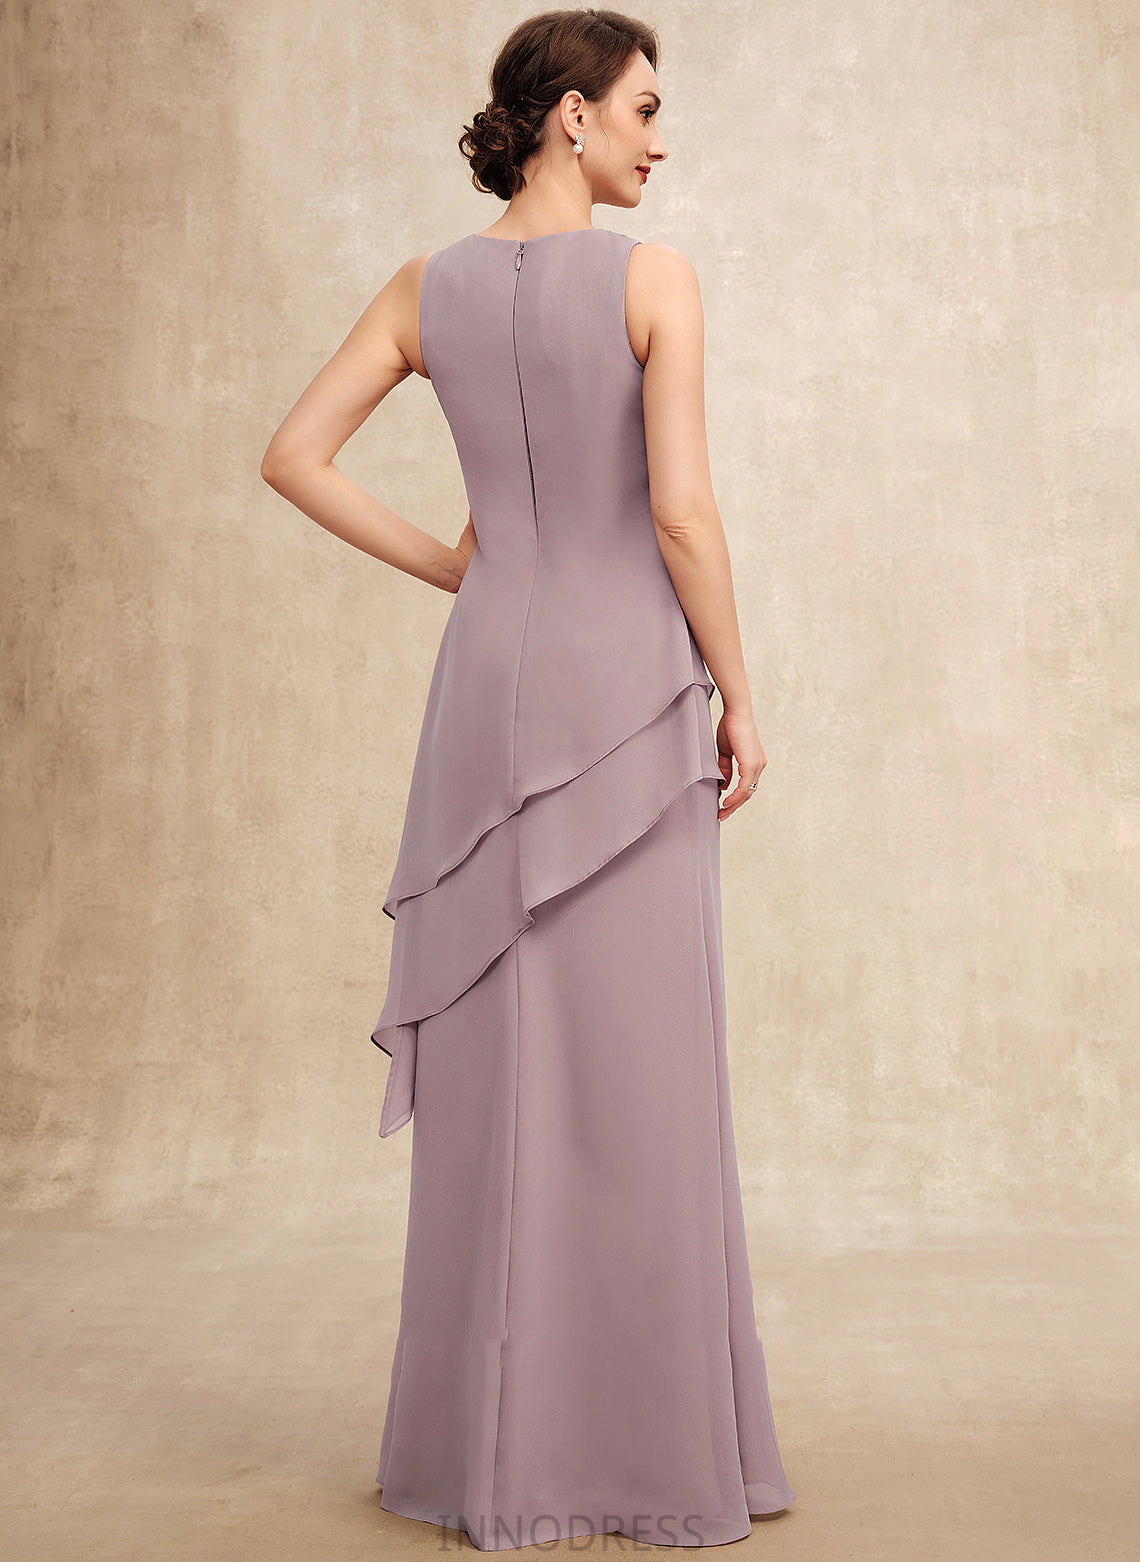 Scoop Neck Beading Chiffon A-Line Dress of Mother of the Bride Dresses With Bride Mother the Tiffany Floor-Length